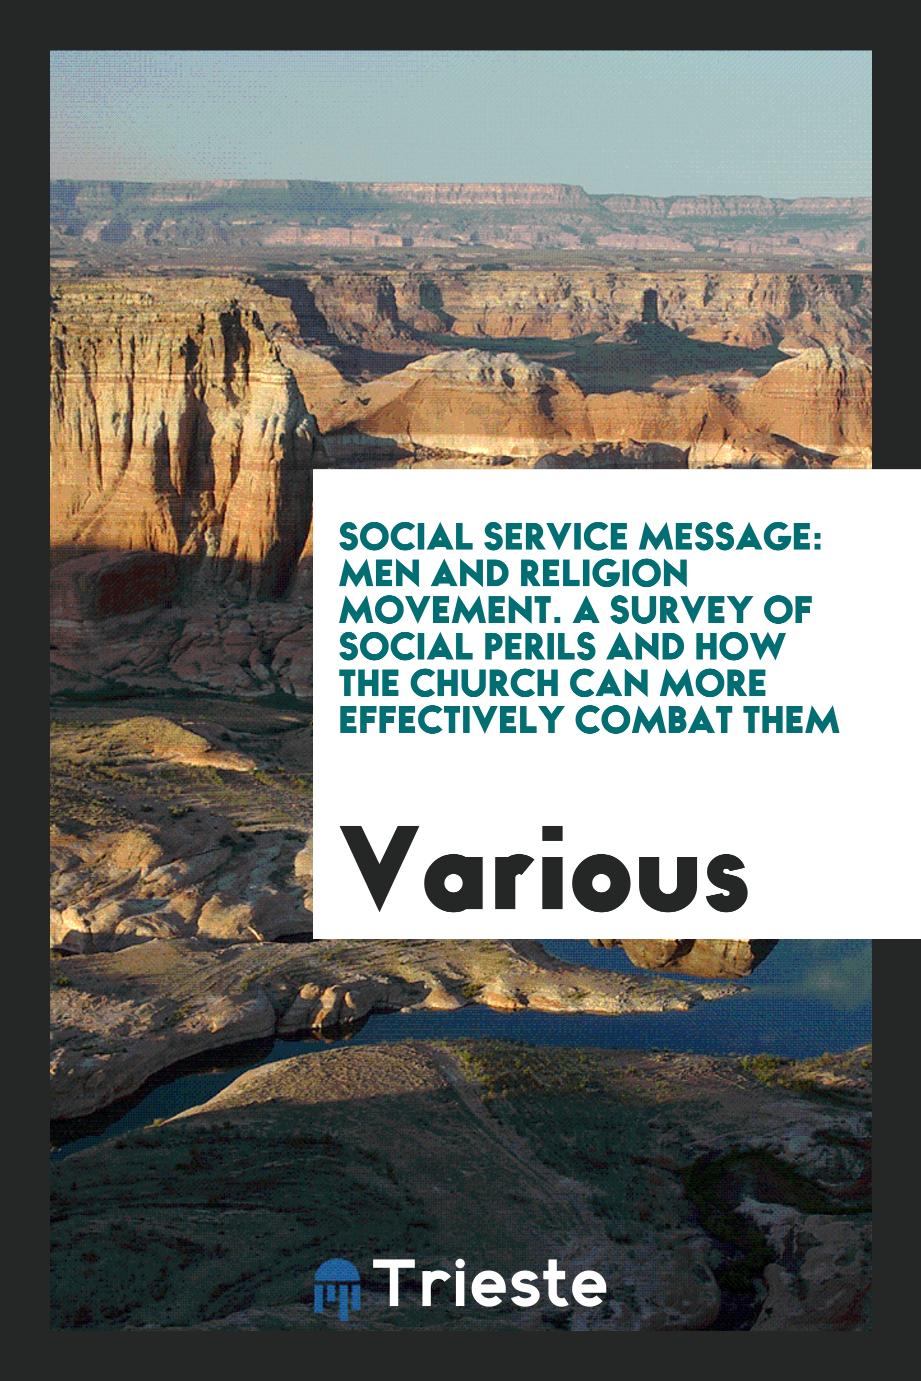 Social Service Message: Men and Religion Movement. A Survey of Social Perils and How the Church Can More Effectively Combat Them